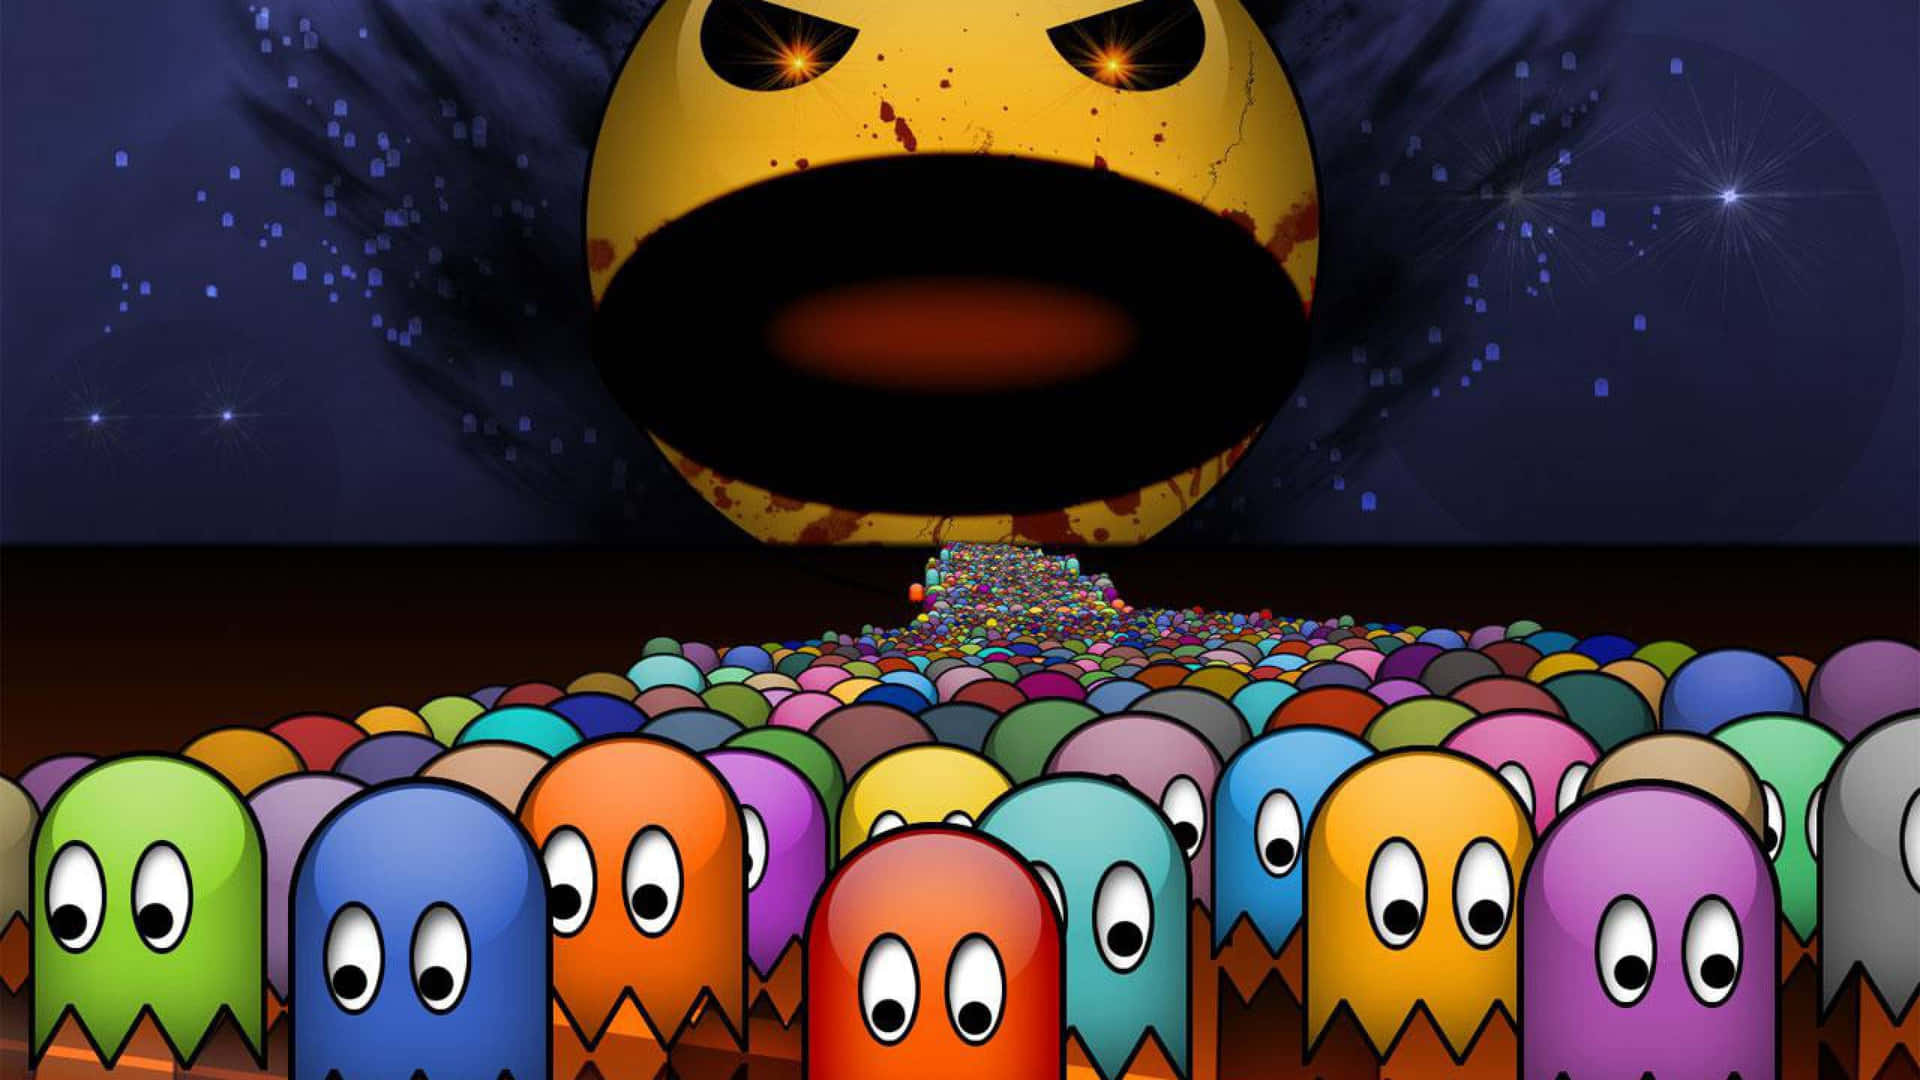 Riveting Capture Of A Vintage Pac-man Game Scene